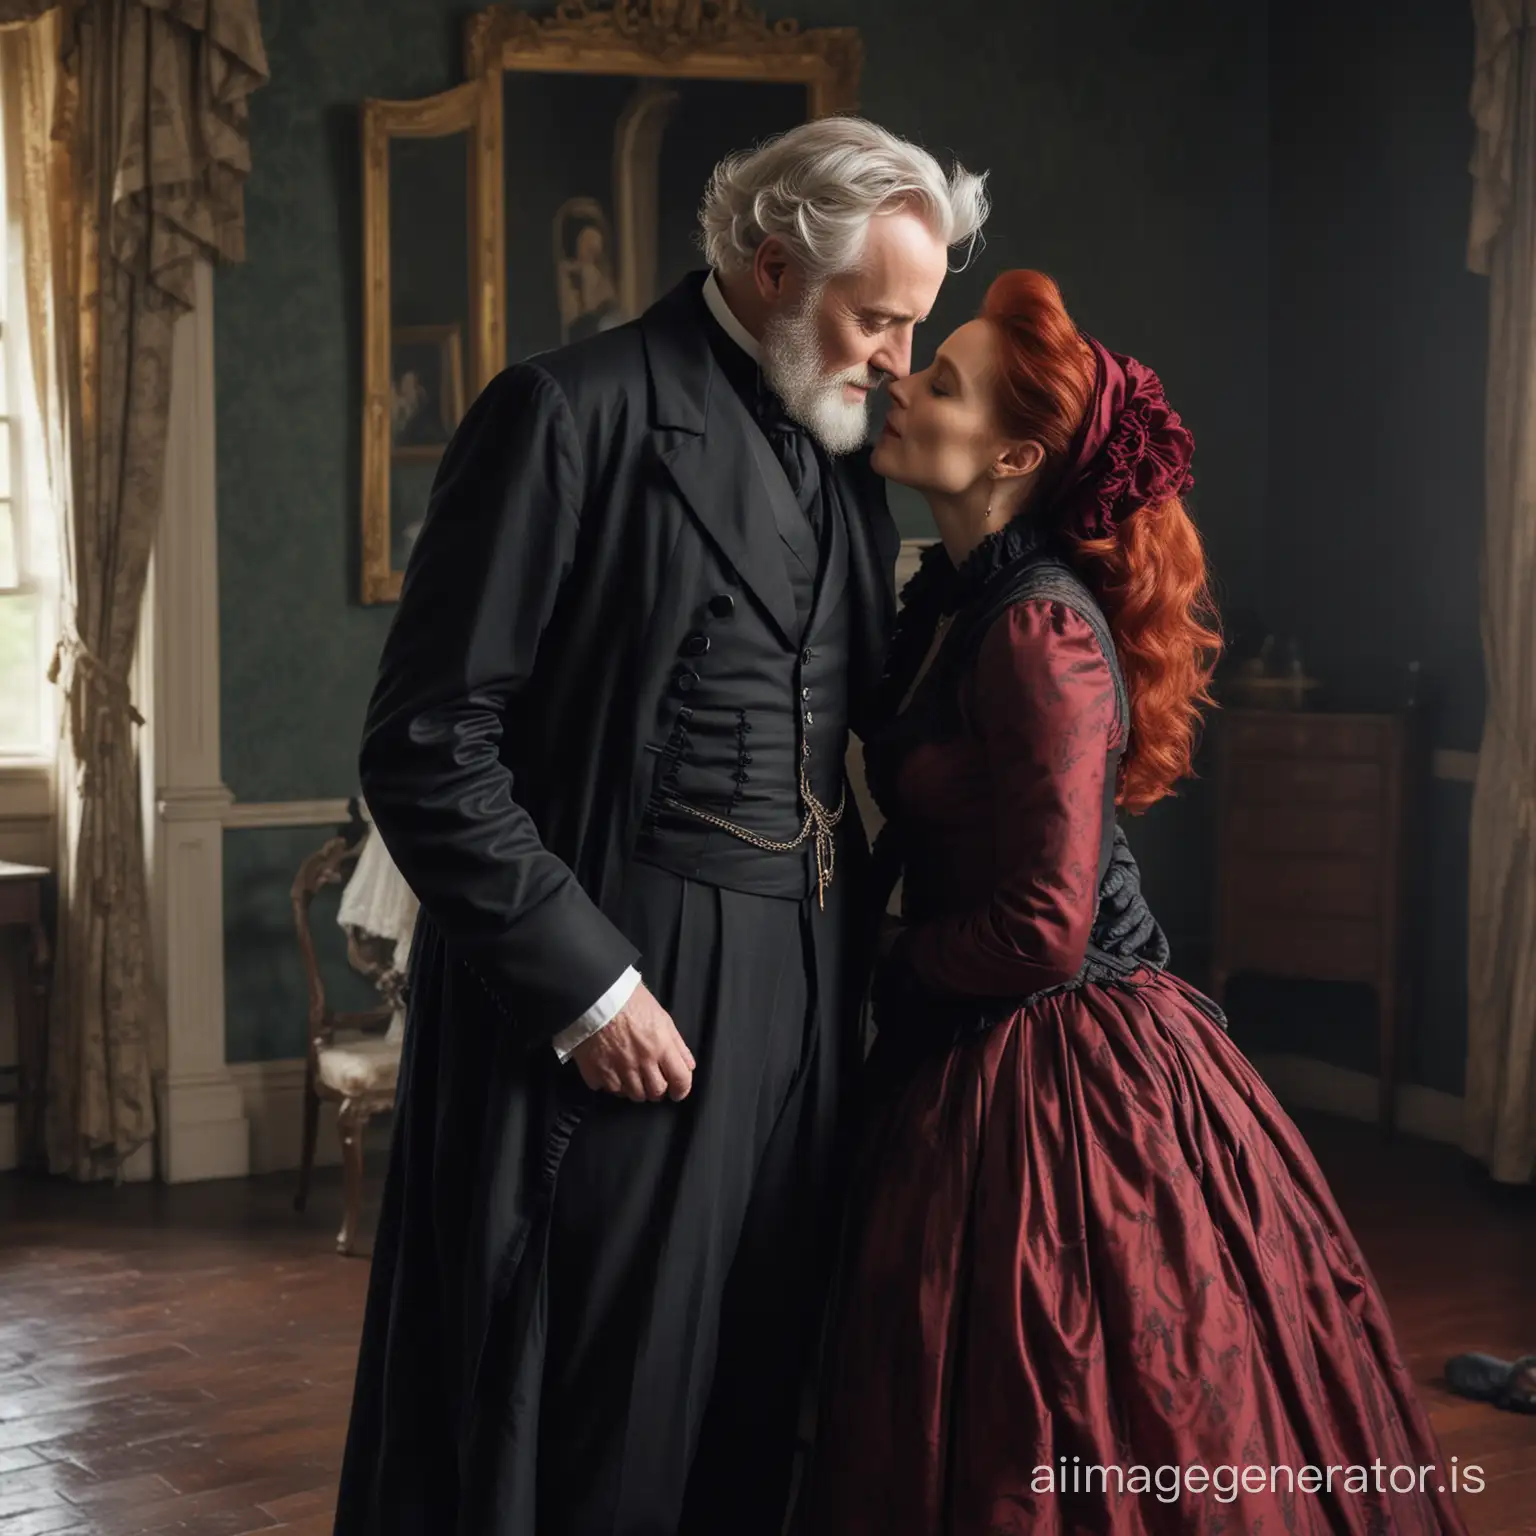 red hair Gillian Anderson wearing a dark crimson floor-length loose billowing 1860 Victorian crinoline dress with a frilly bonnet kissing an old man dressed in a black Victorian suit who seems to be her newlywed husband